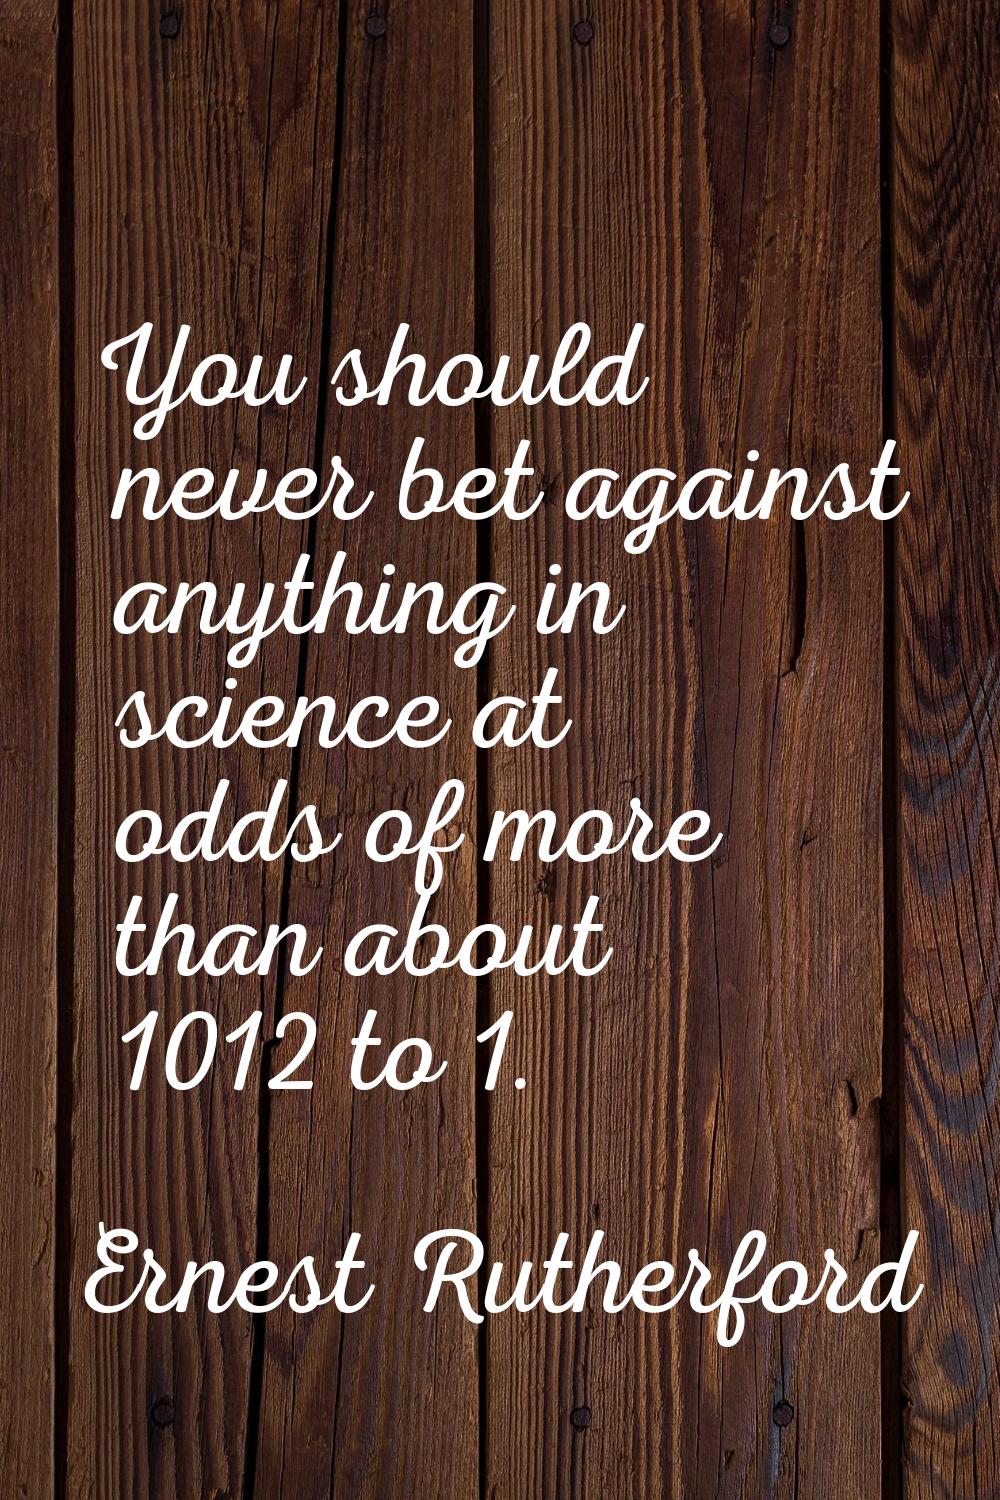 You should never bet against anything in science at odds of more than about 1012 to 1.